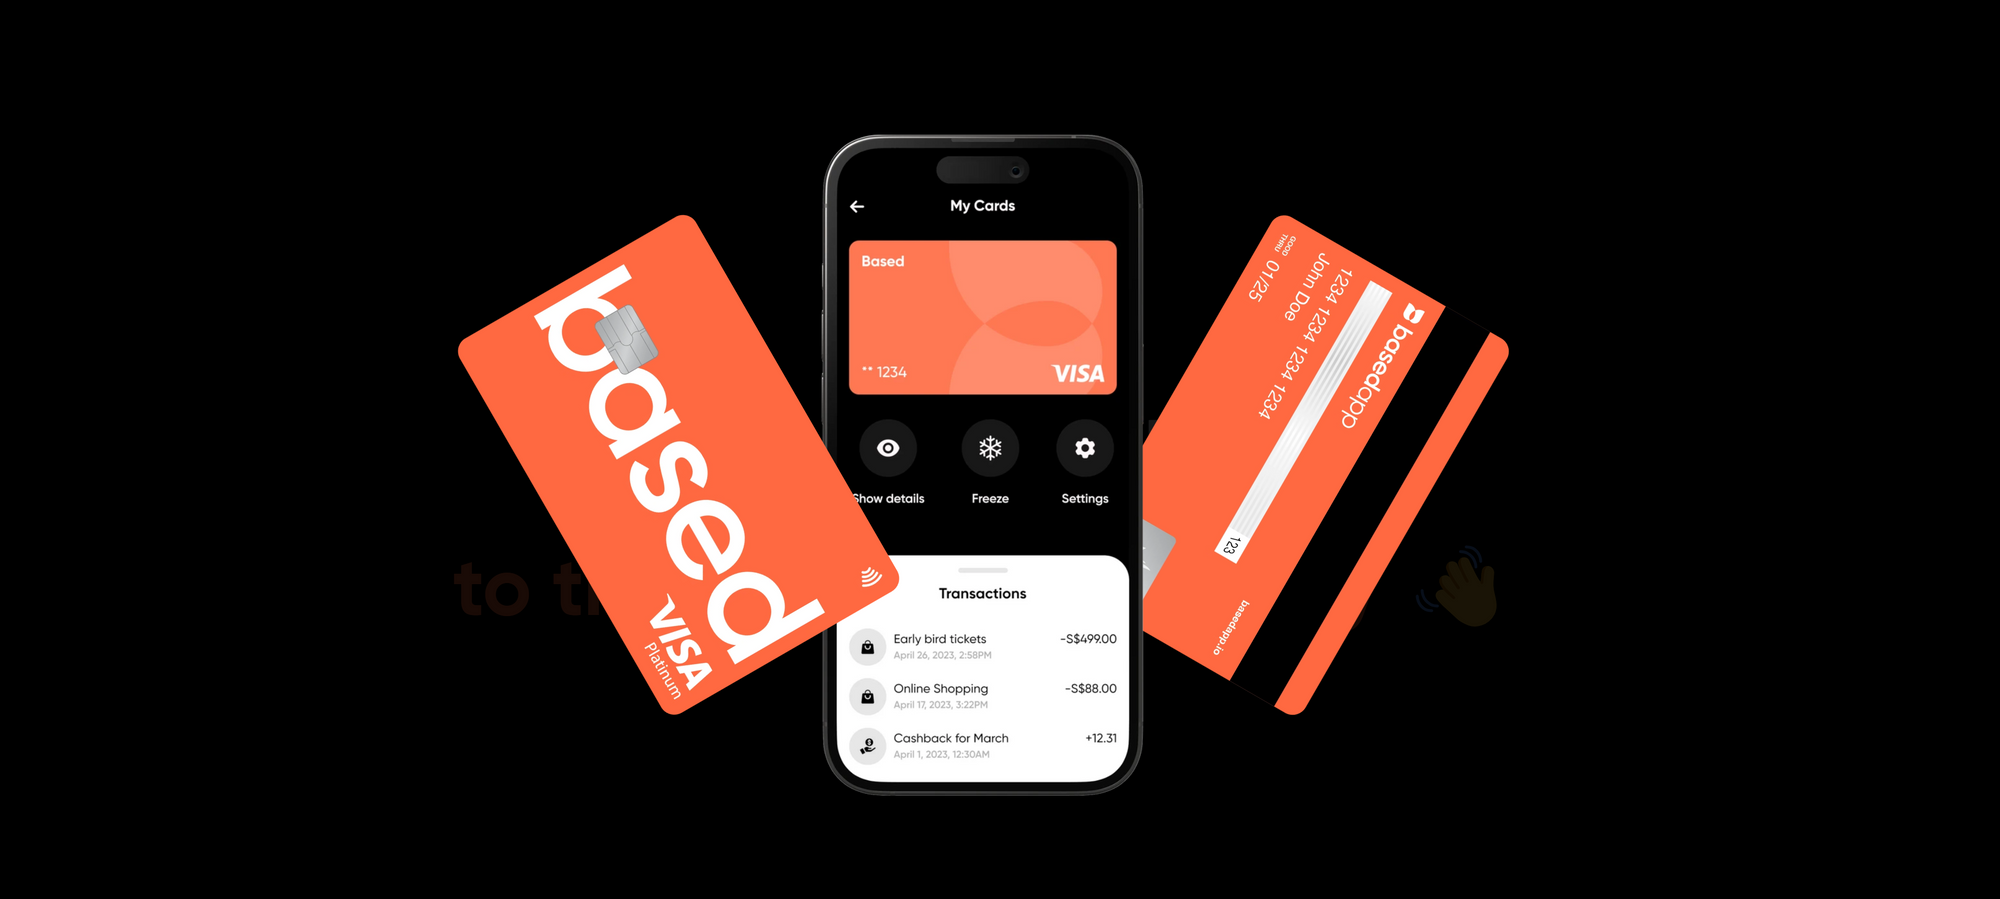 BasedApp Launches XSGD Rewards Program Offering Up to 1.5% Interest